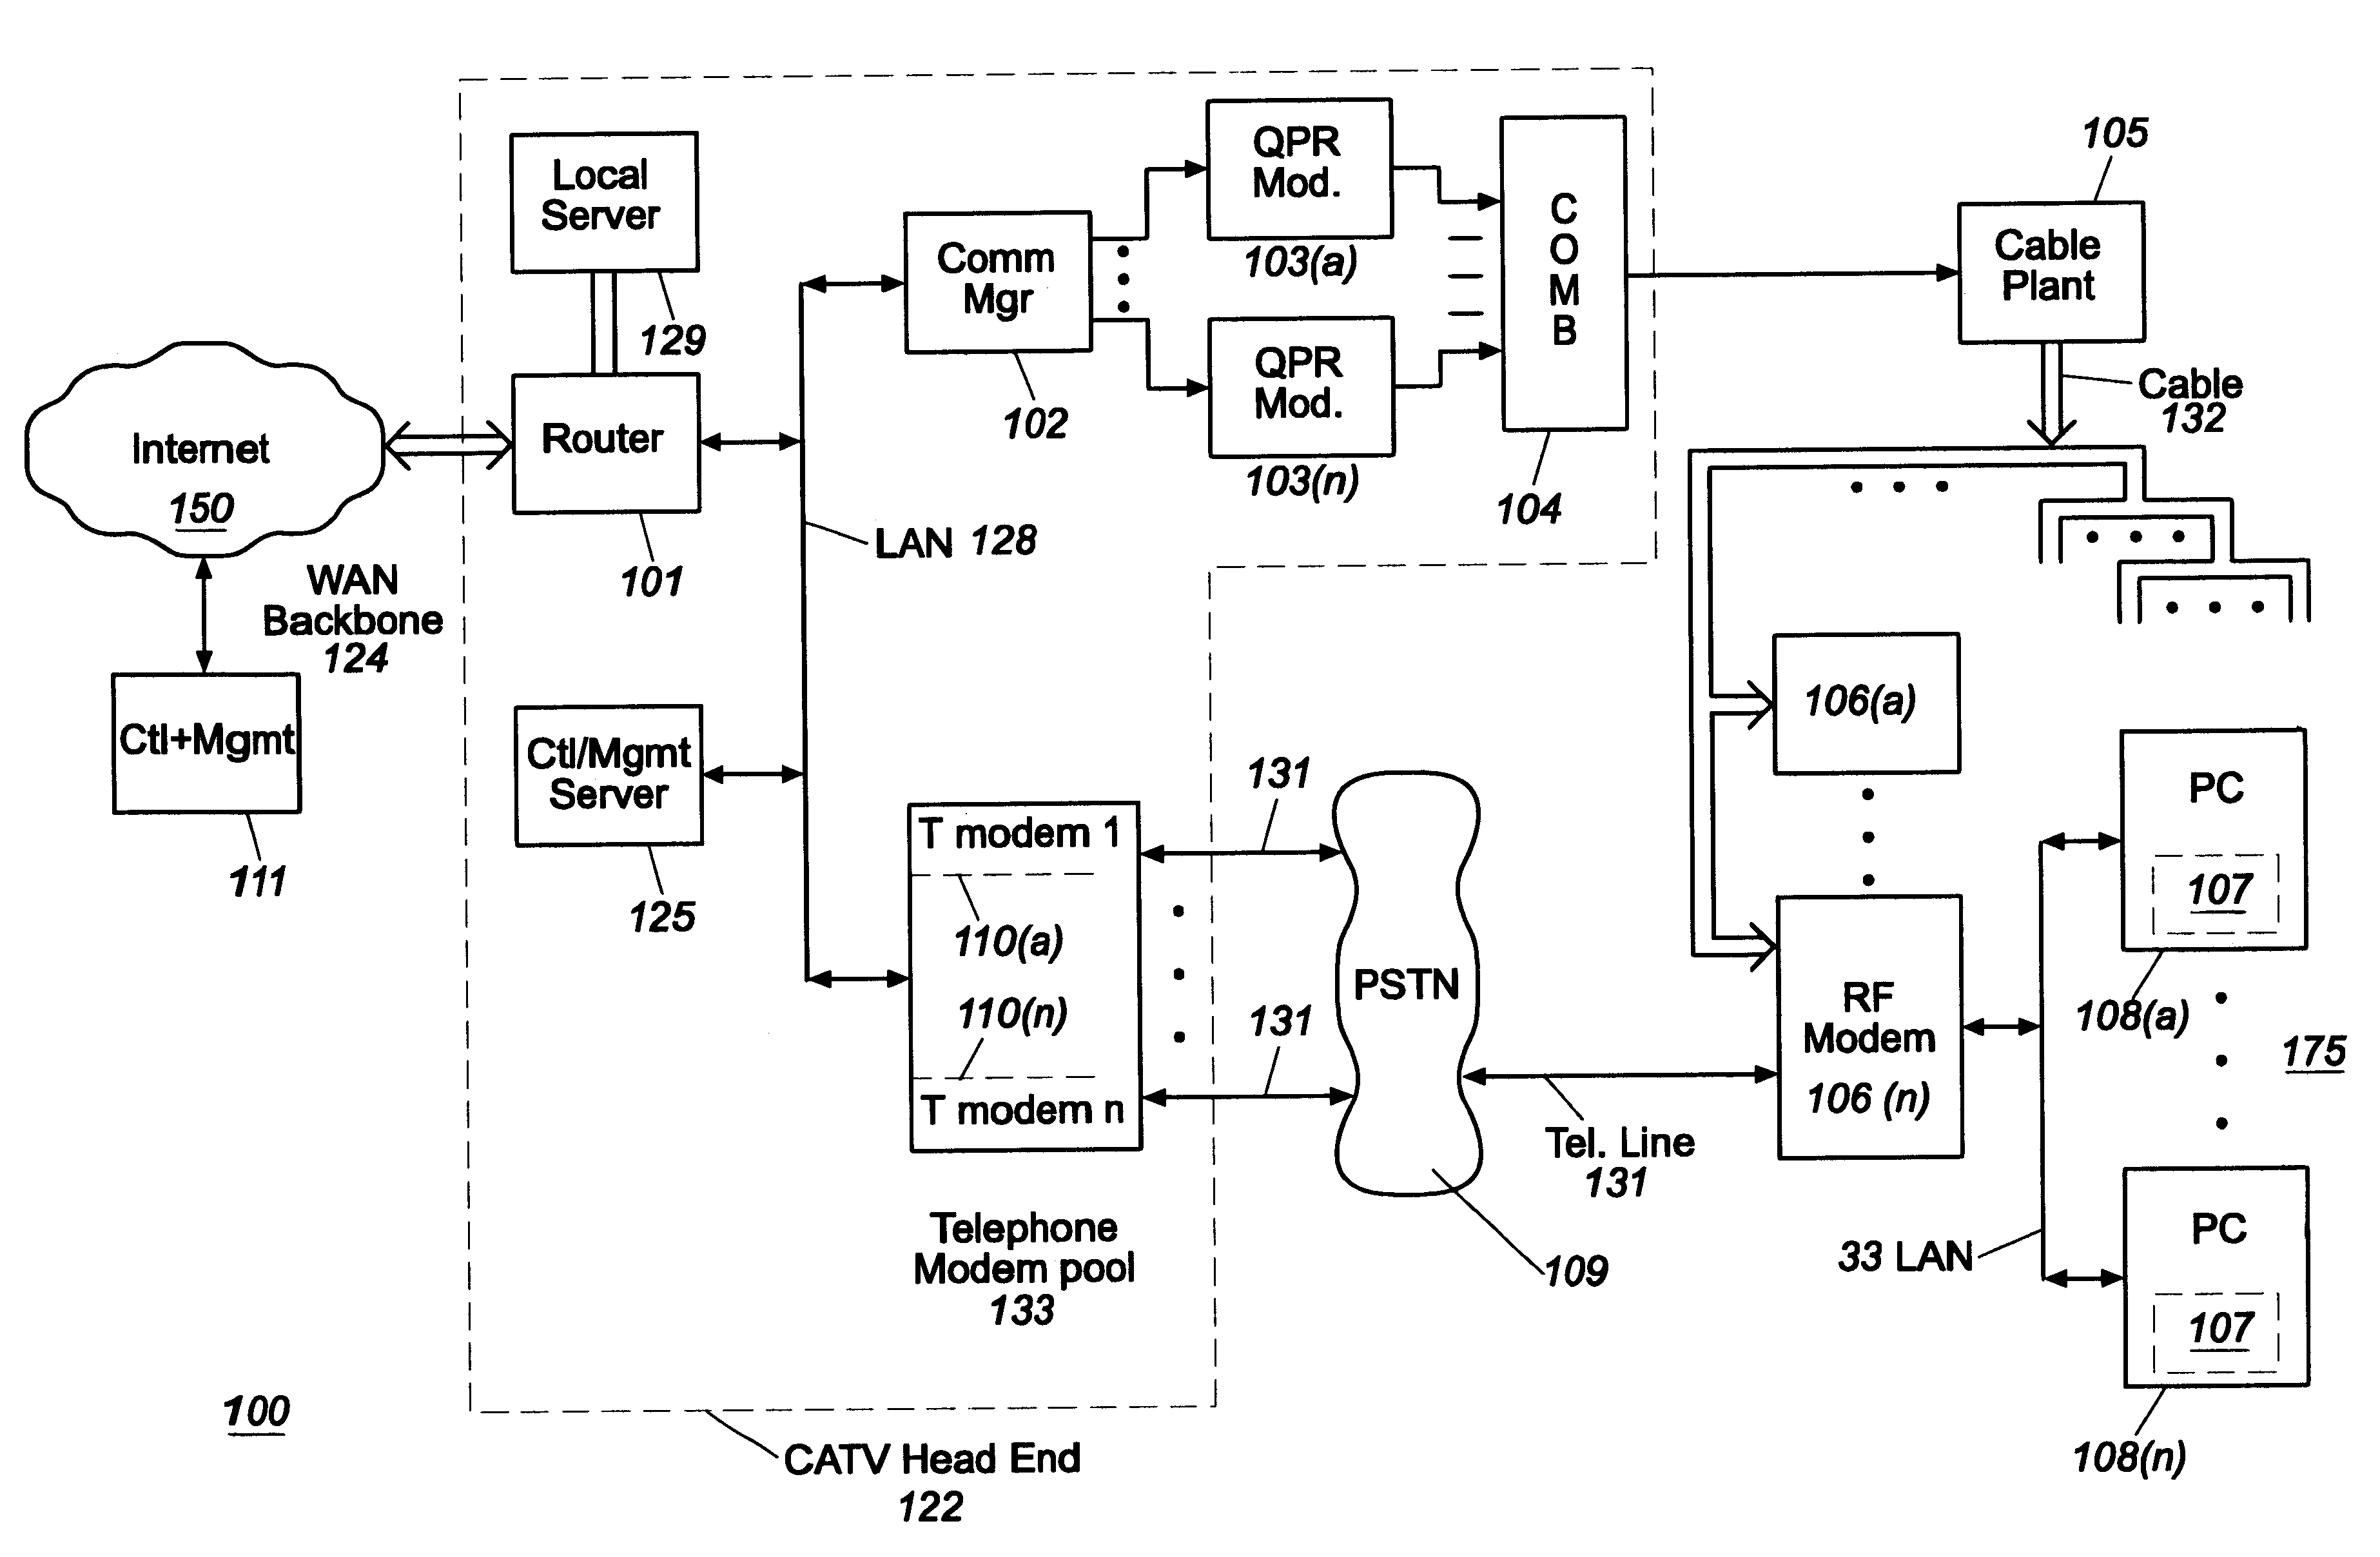 Cable modem map display for network management of a cable data delivery system